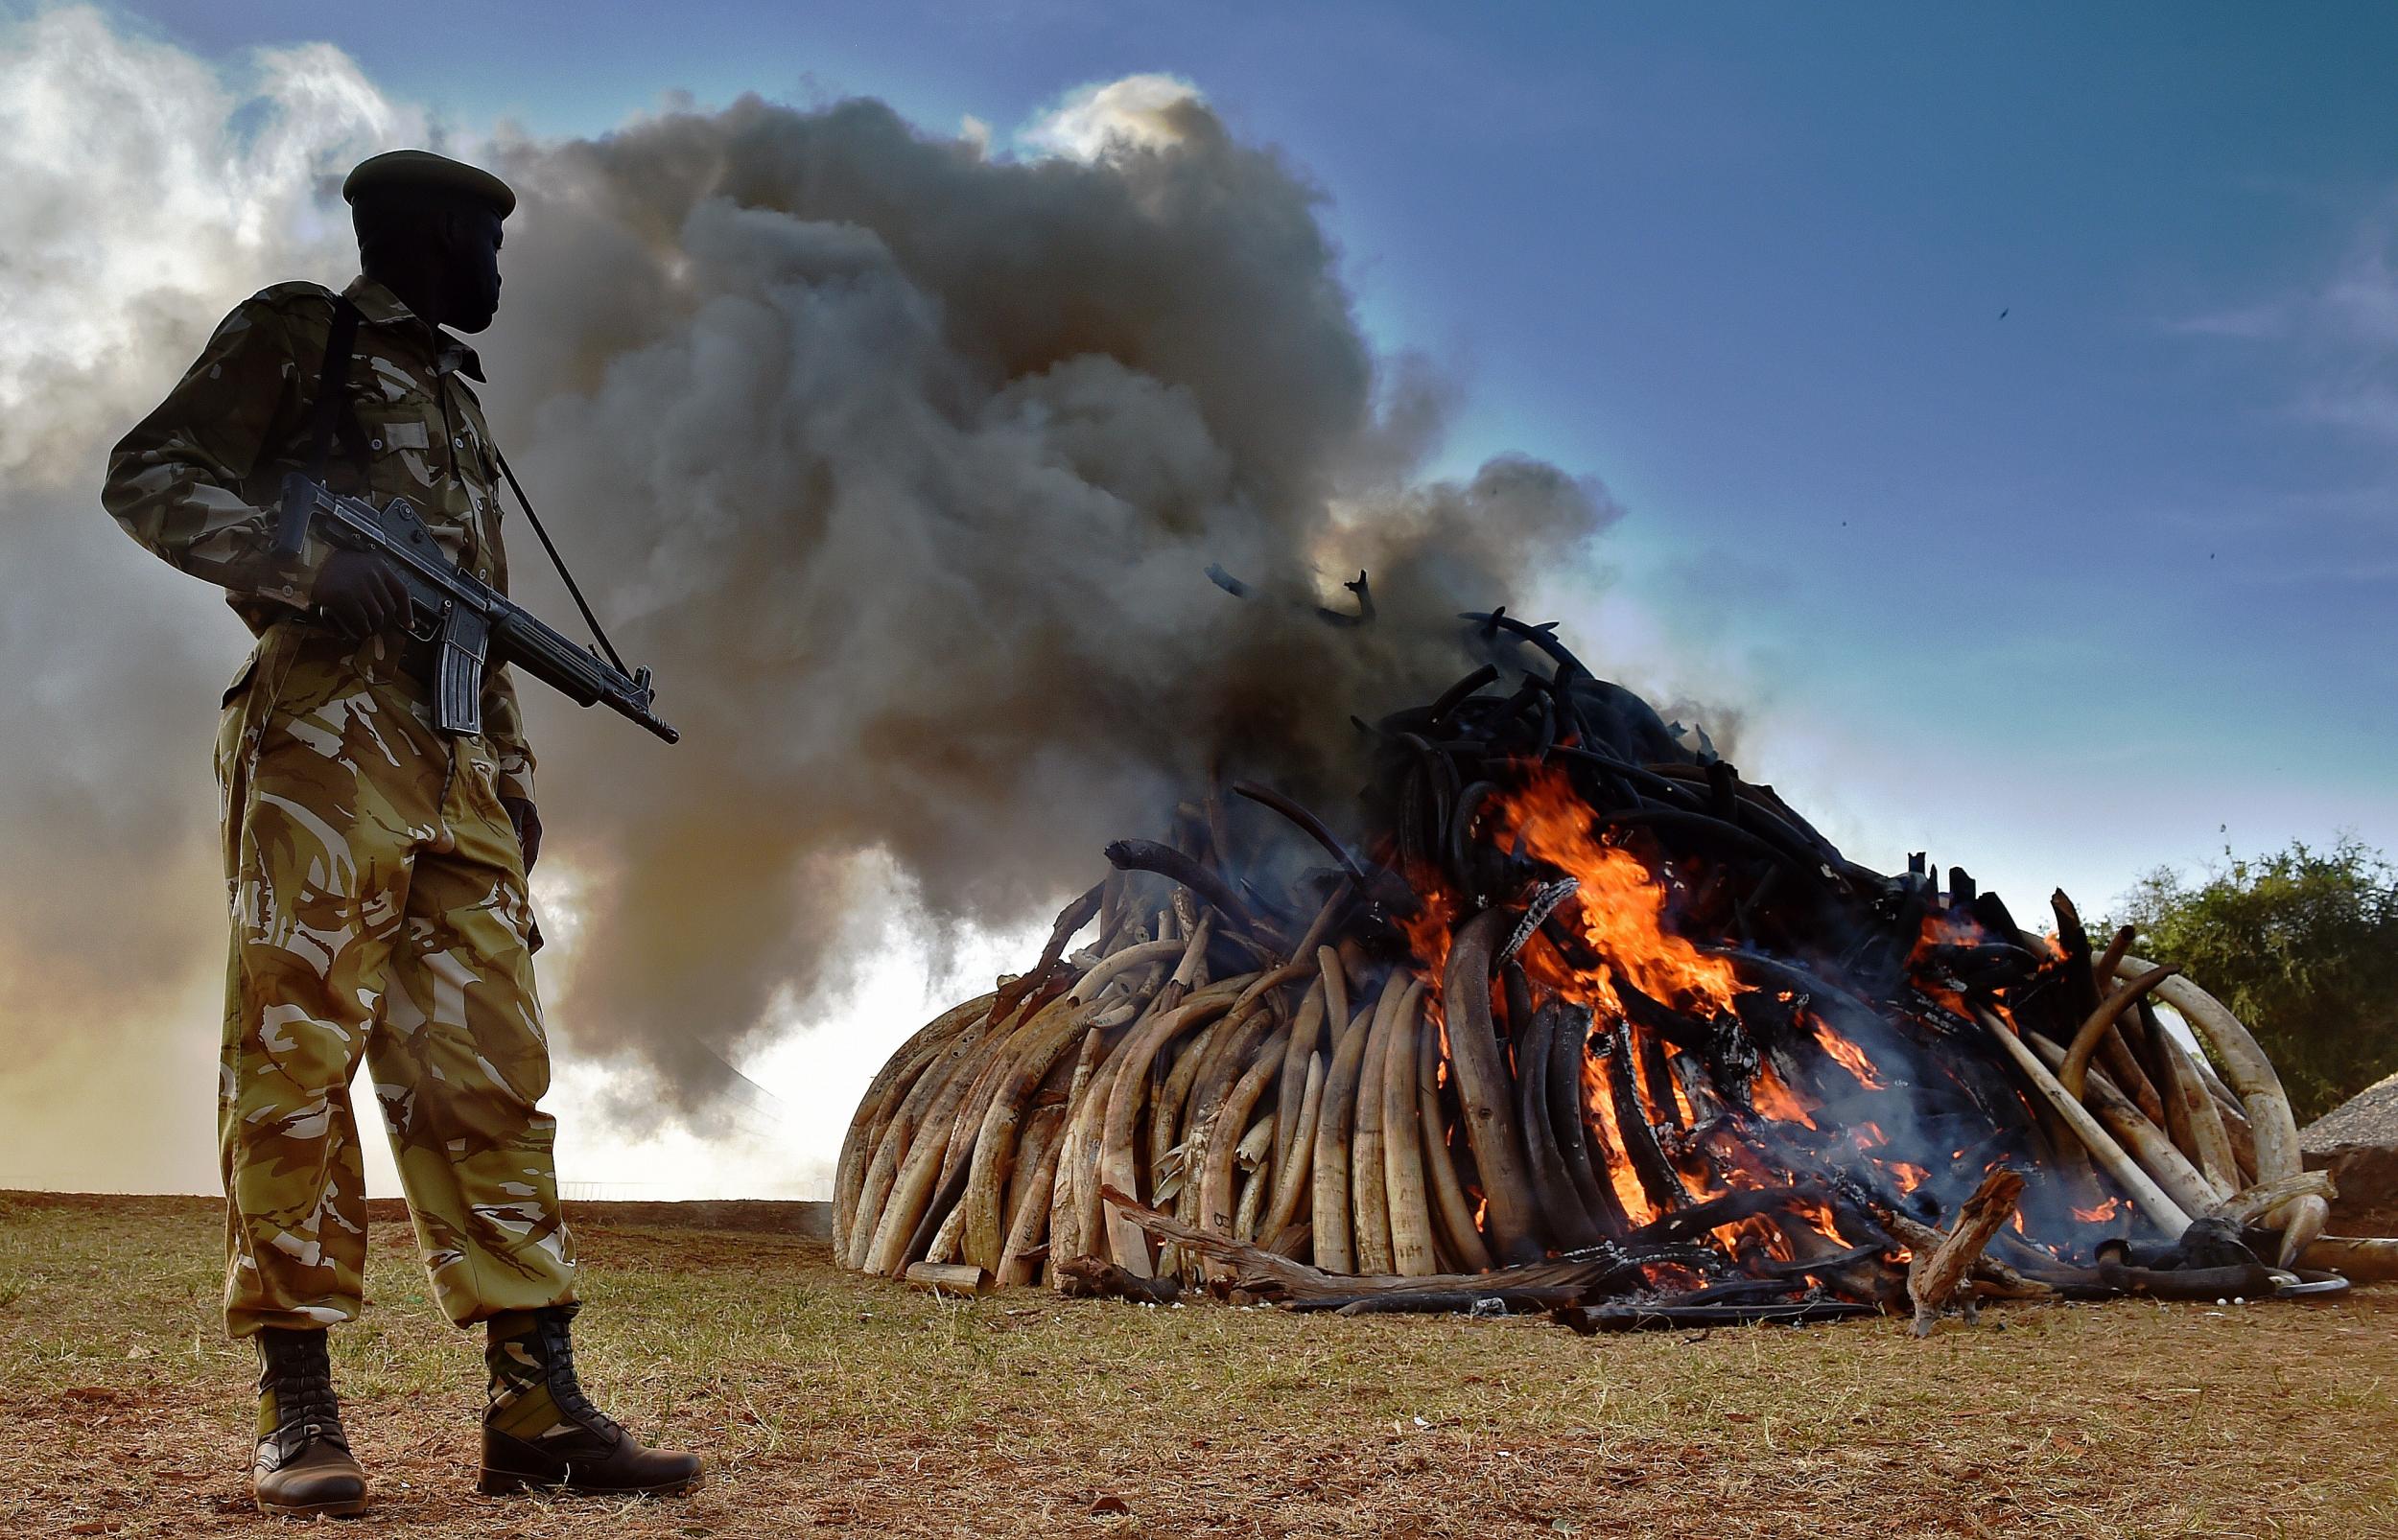 A Kenya Wildlife Services officer stands near a burning pile of 15 tonnes of elephant ivory seized at Nairobi National Park last year